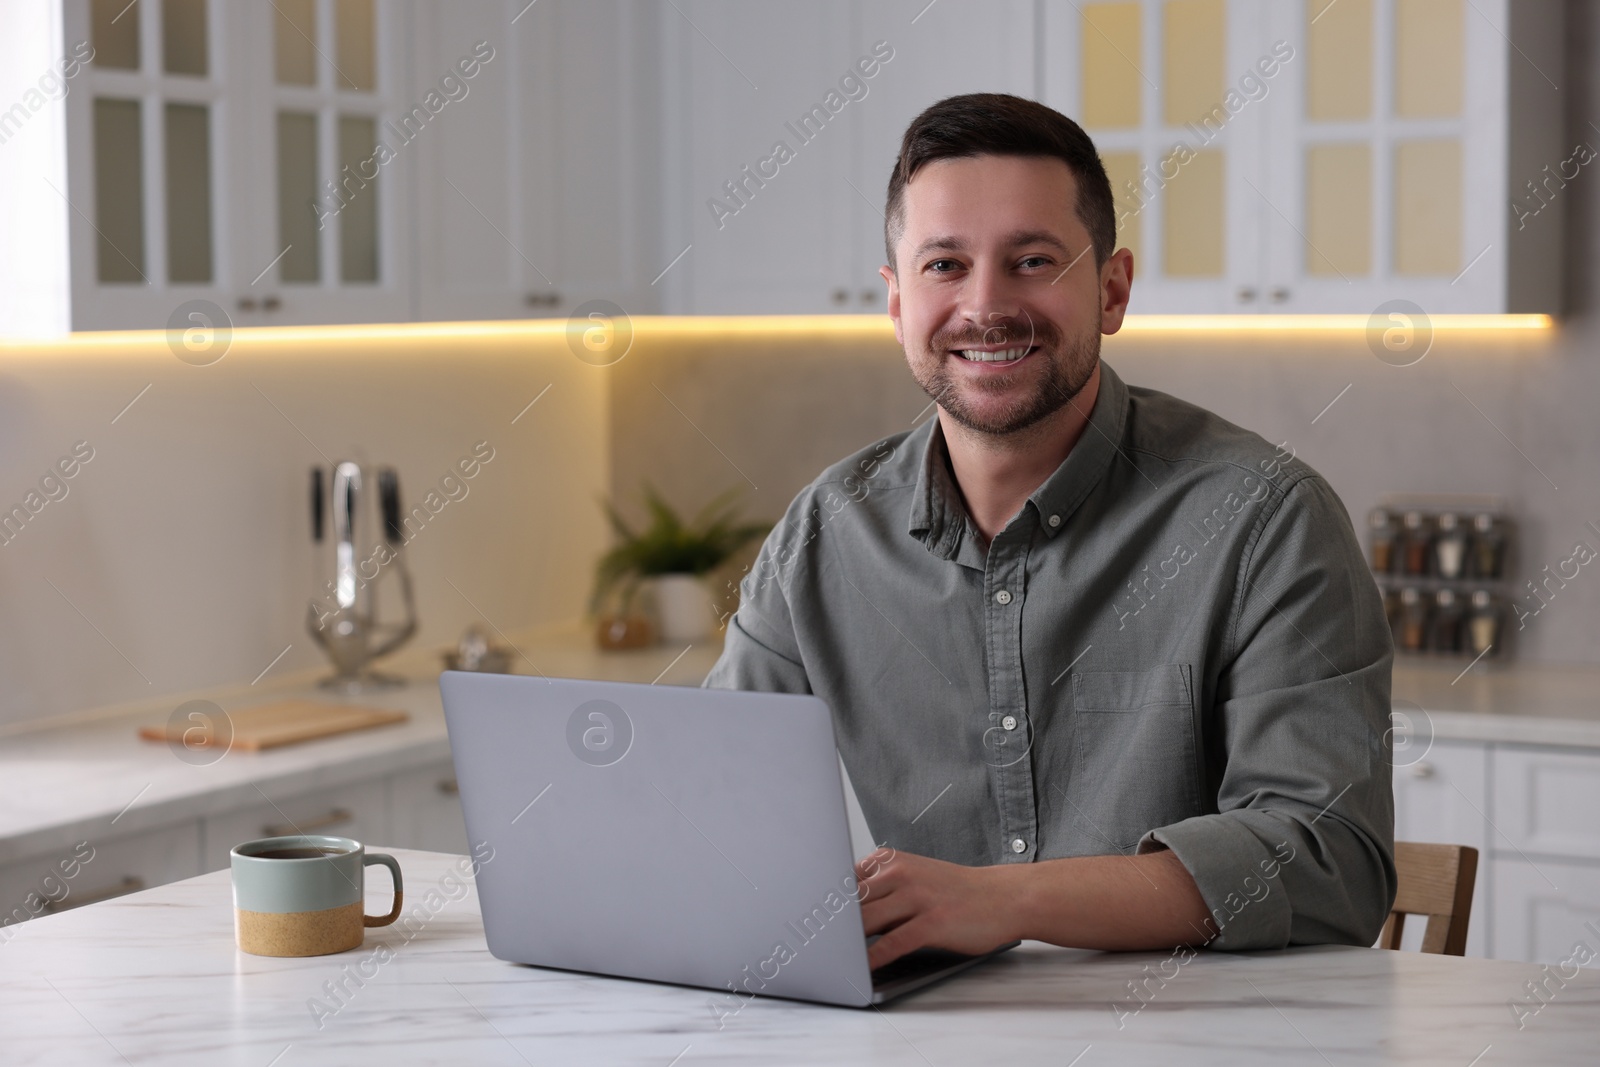 Photo of Happy man working on laptop at white marble table in kitchen